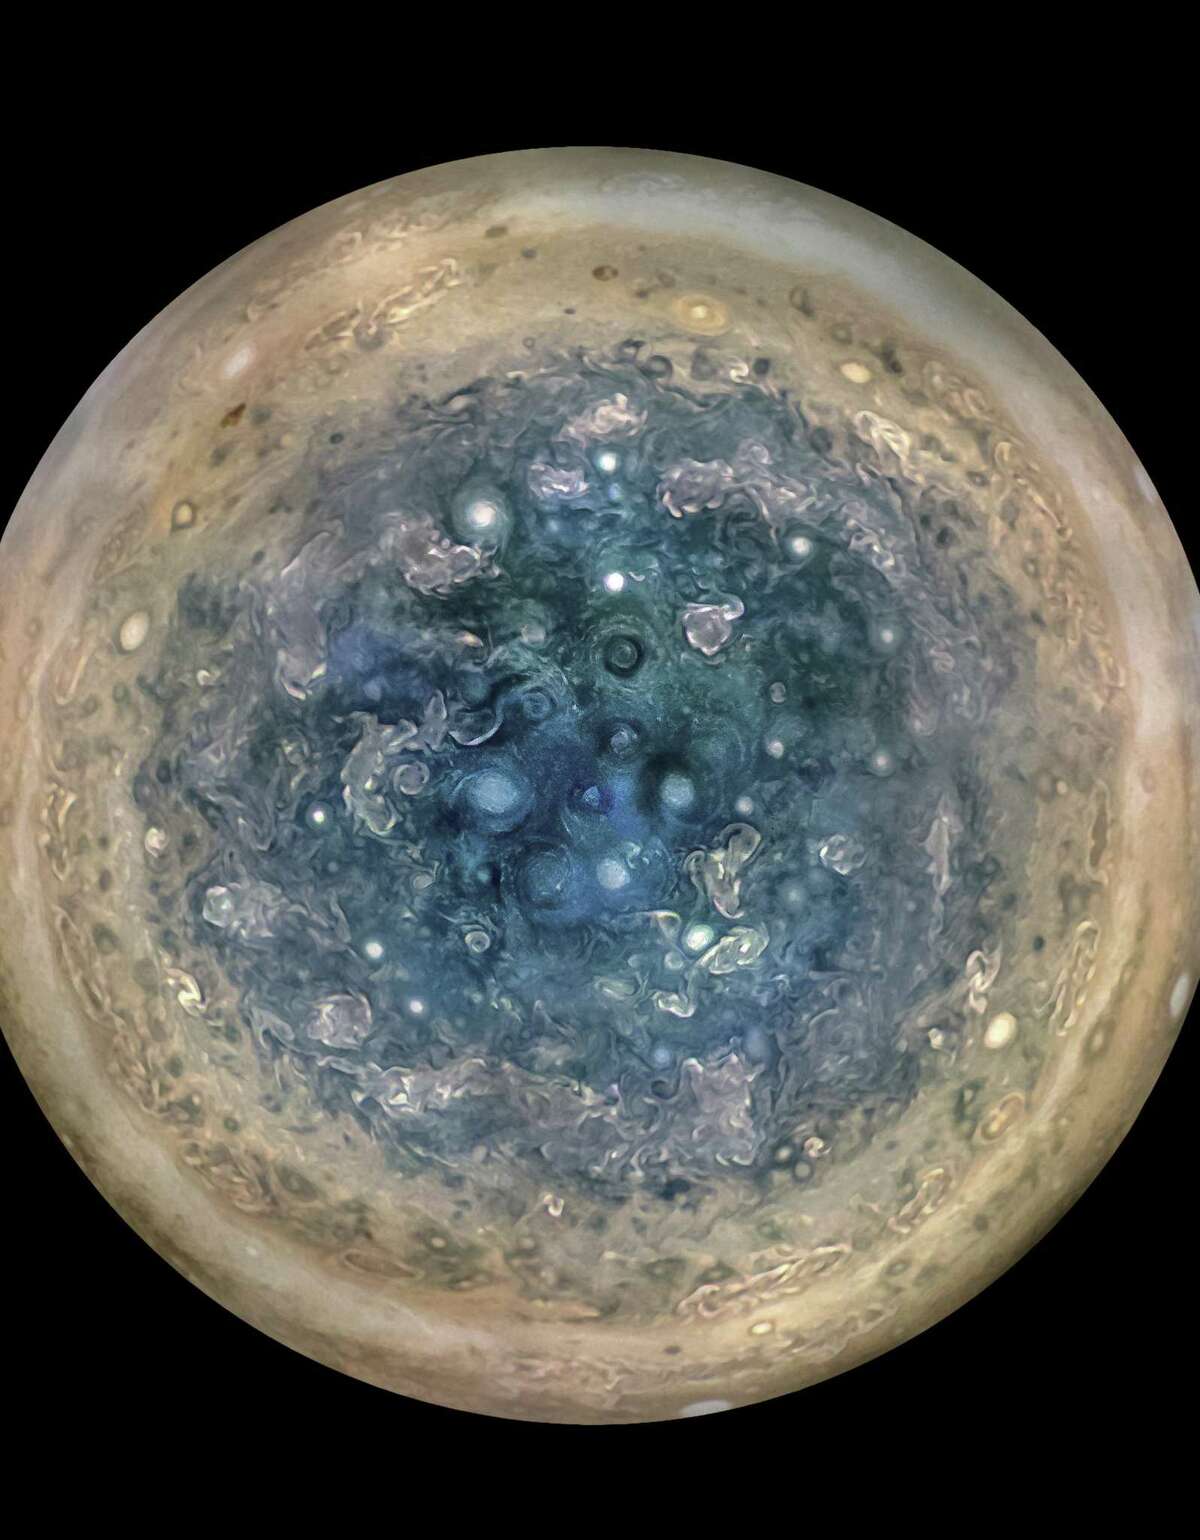 This composite image, made using data from three separate orbits, shows Jupiter’s south pole. The oval features are cyclones, up to 600 miles in diameter. The cyclones are separate from Jupiter’s trademark Great Red Spot, a raging hurricane-like storm south of the equator.